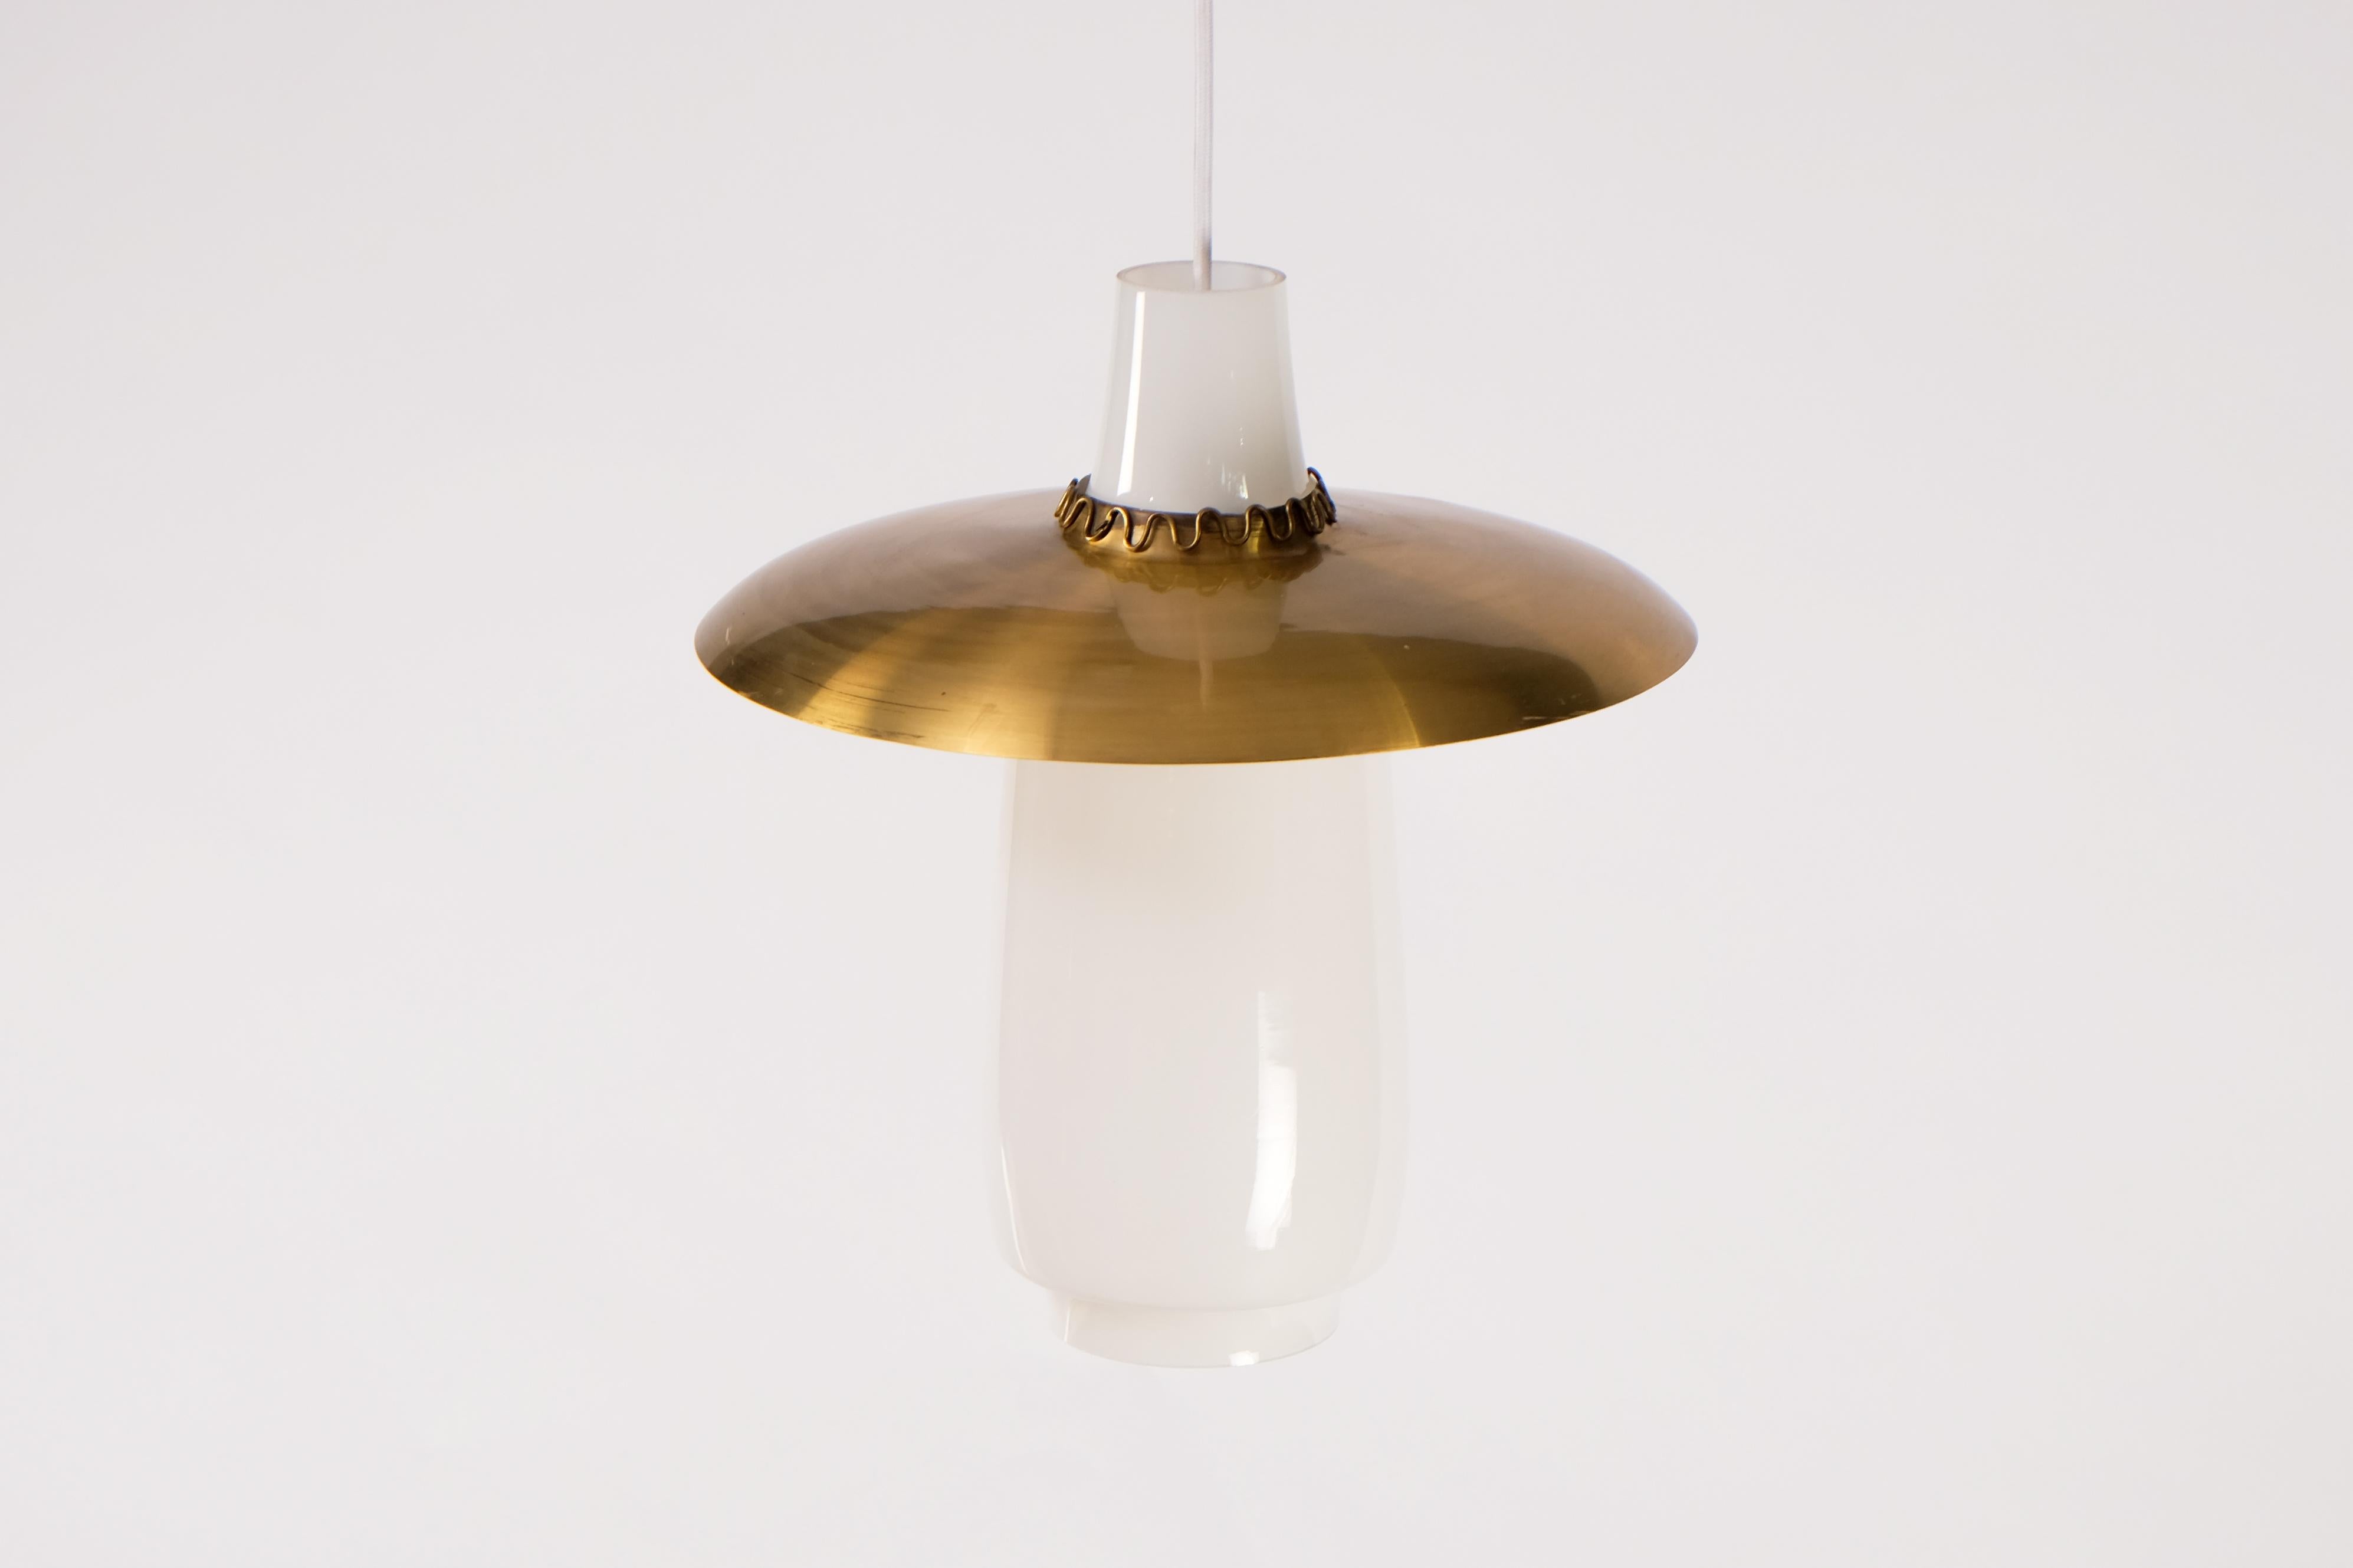 Blown glass and brass shade or reflector. 
New wiring.